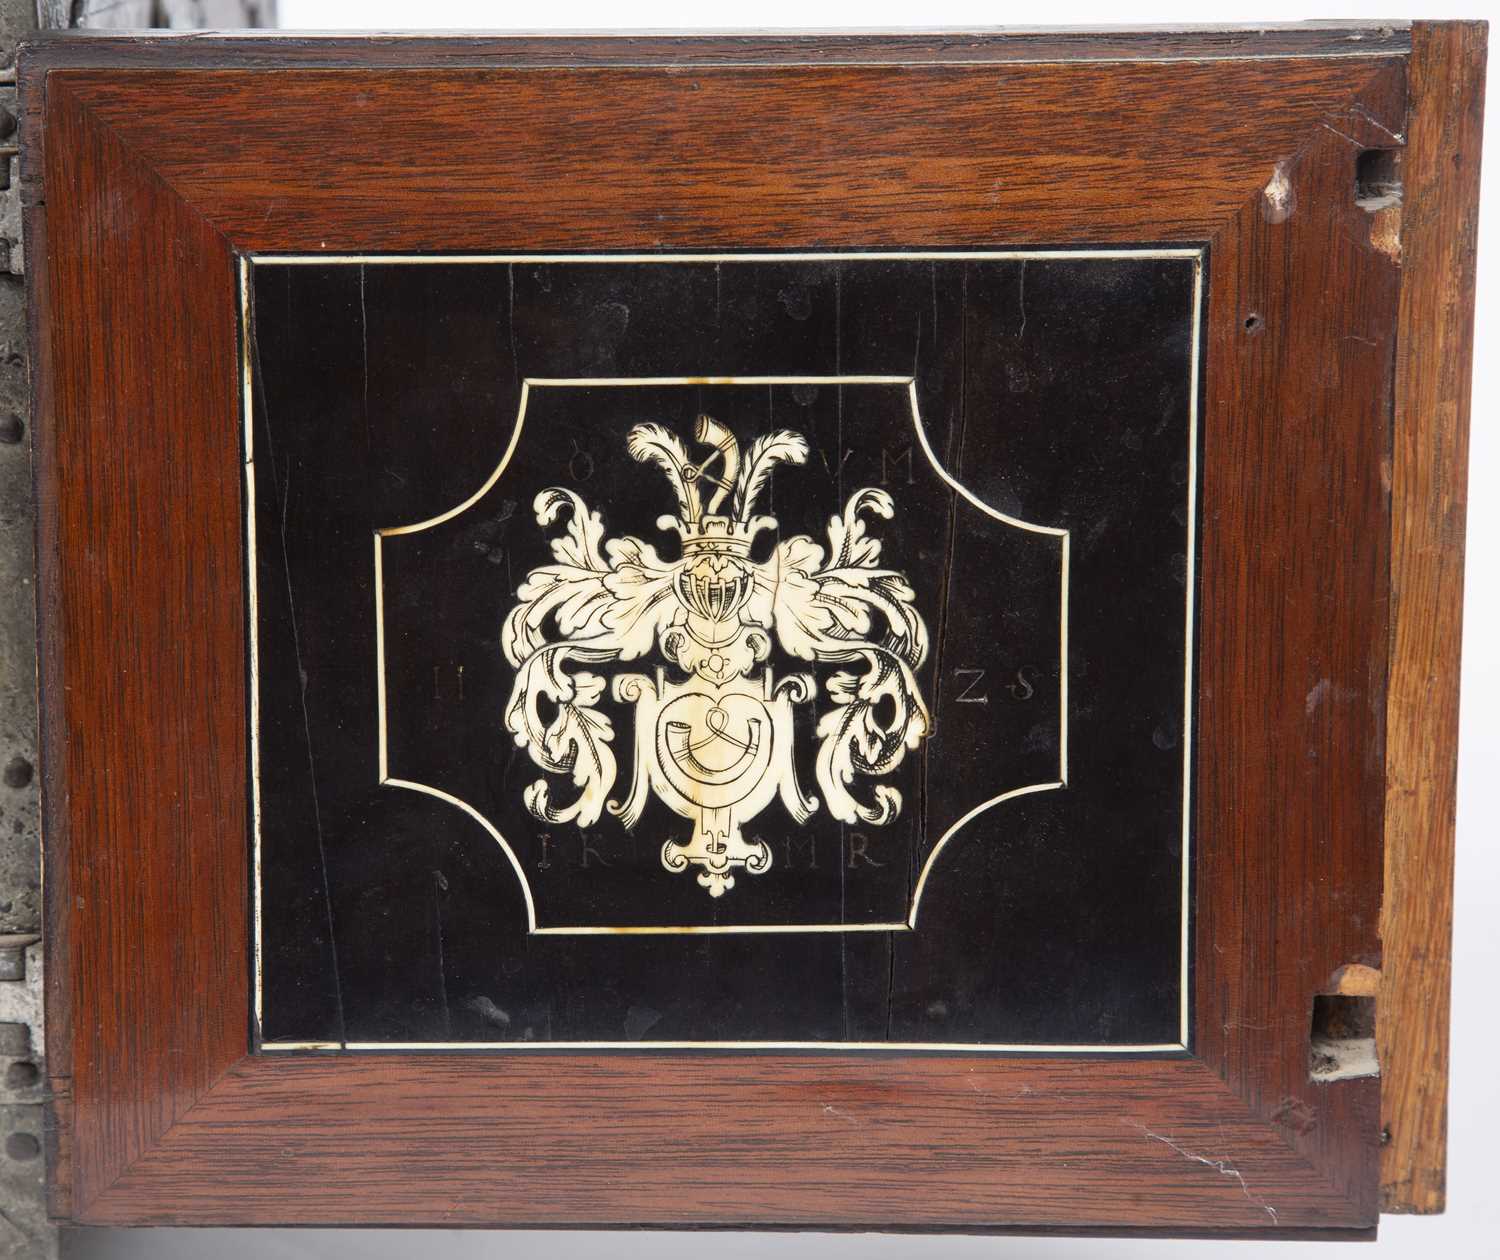 A 17th century German oak and metal bound table top cabinet of drawers, having a double headed eagle - Image 10 of 10